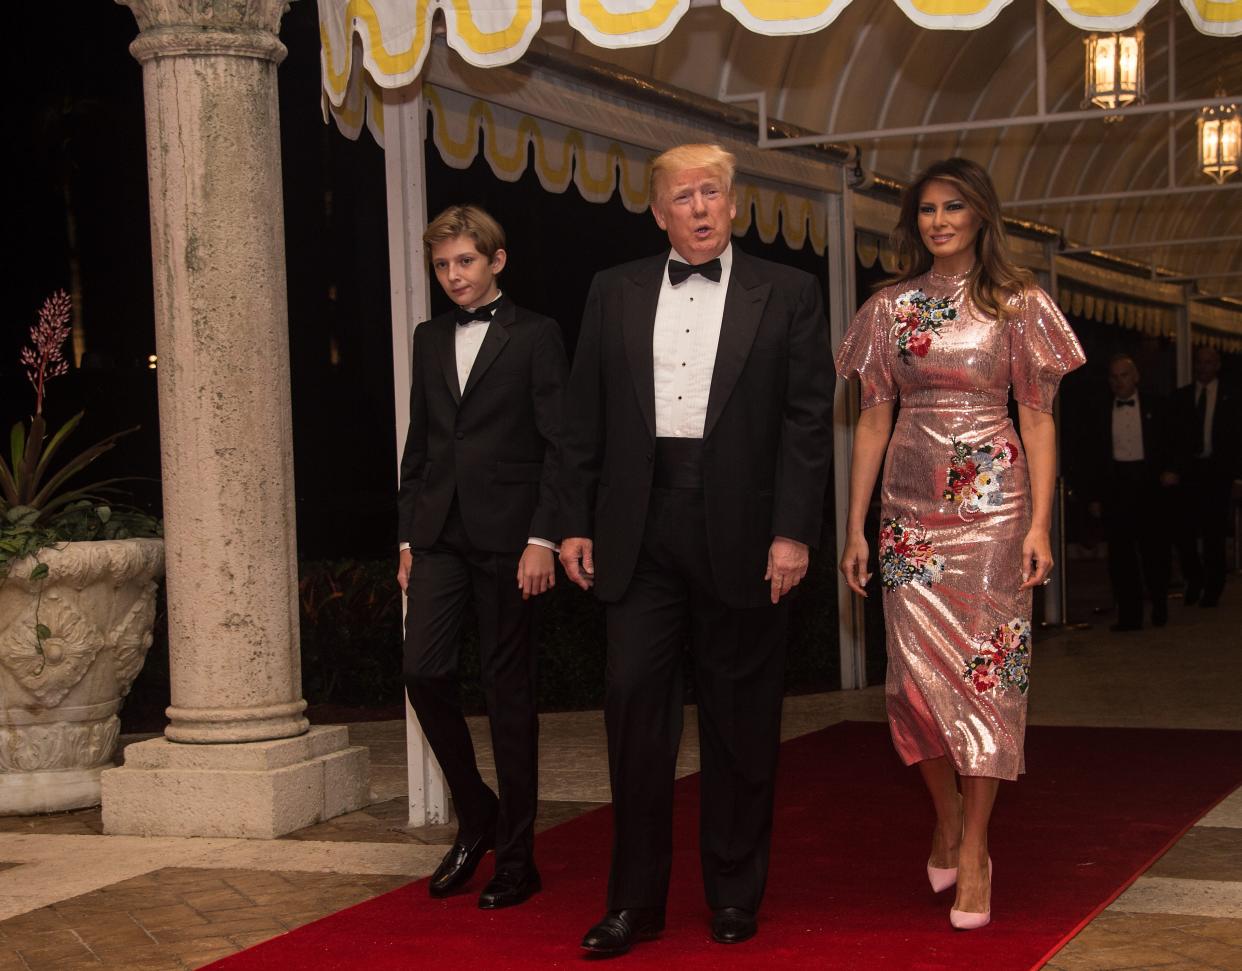 <p>File Image: Donald Trump and first lady Melania Trump at Mar-a-Lago resort in Palm Beach, Florida, on December 31, 2017 for New Year bash. Trump’s New Year’s Eve parties have been a tradition for him predating his presidential term. </p> (Getty Images)